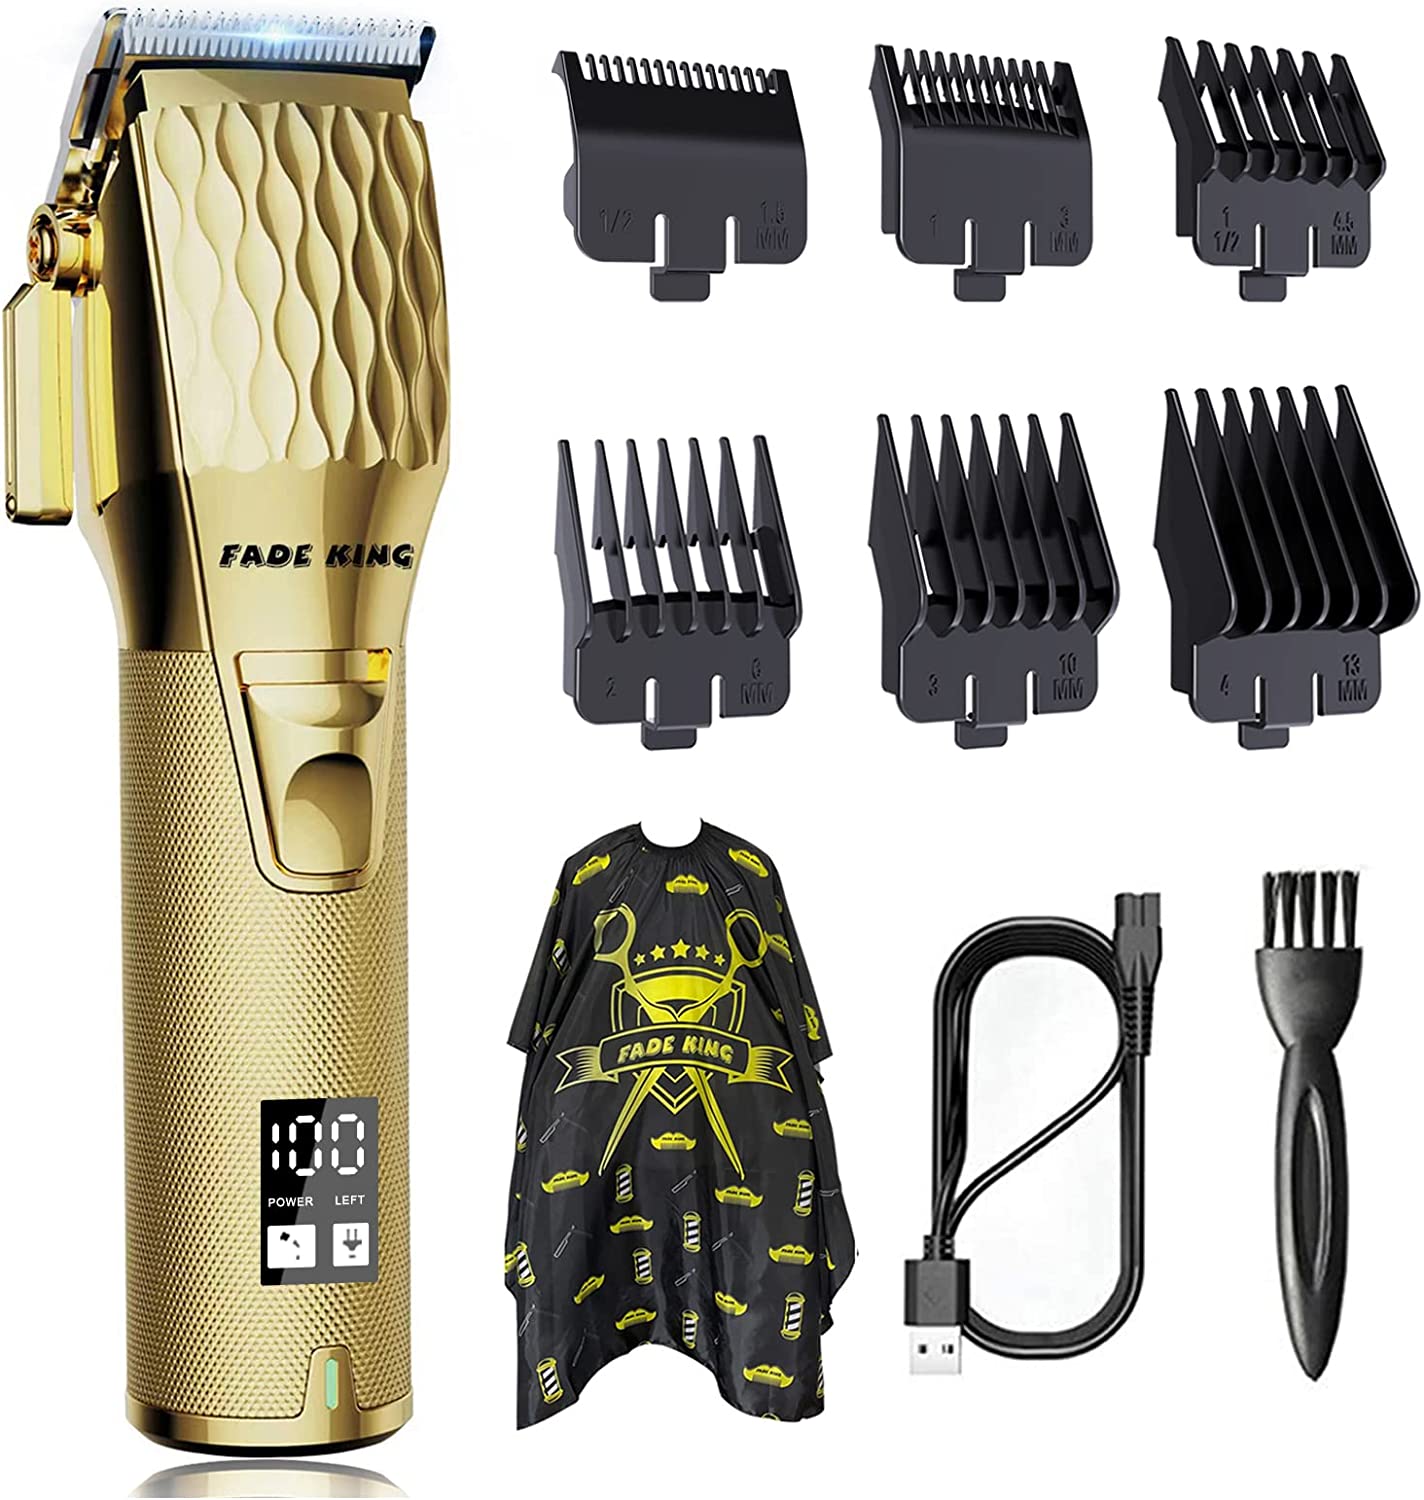 FADEKING Professional Hair Clippers for Men - Best Men's electric hair clippers, Rechargeable Hair Beard Trimmer with LED Display & Quality Travel Storage Case (Silver)